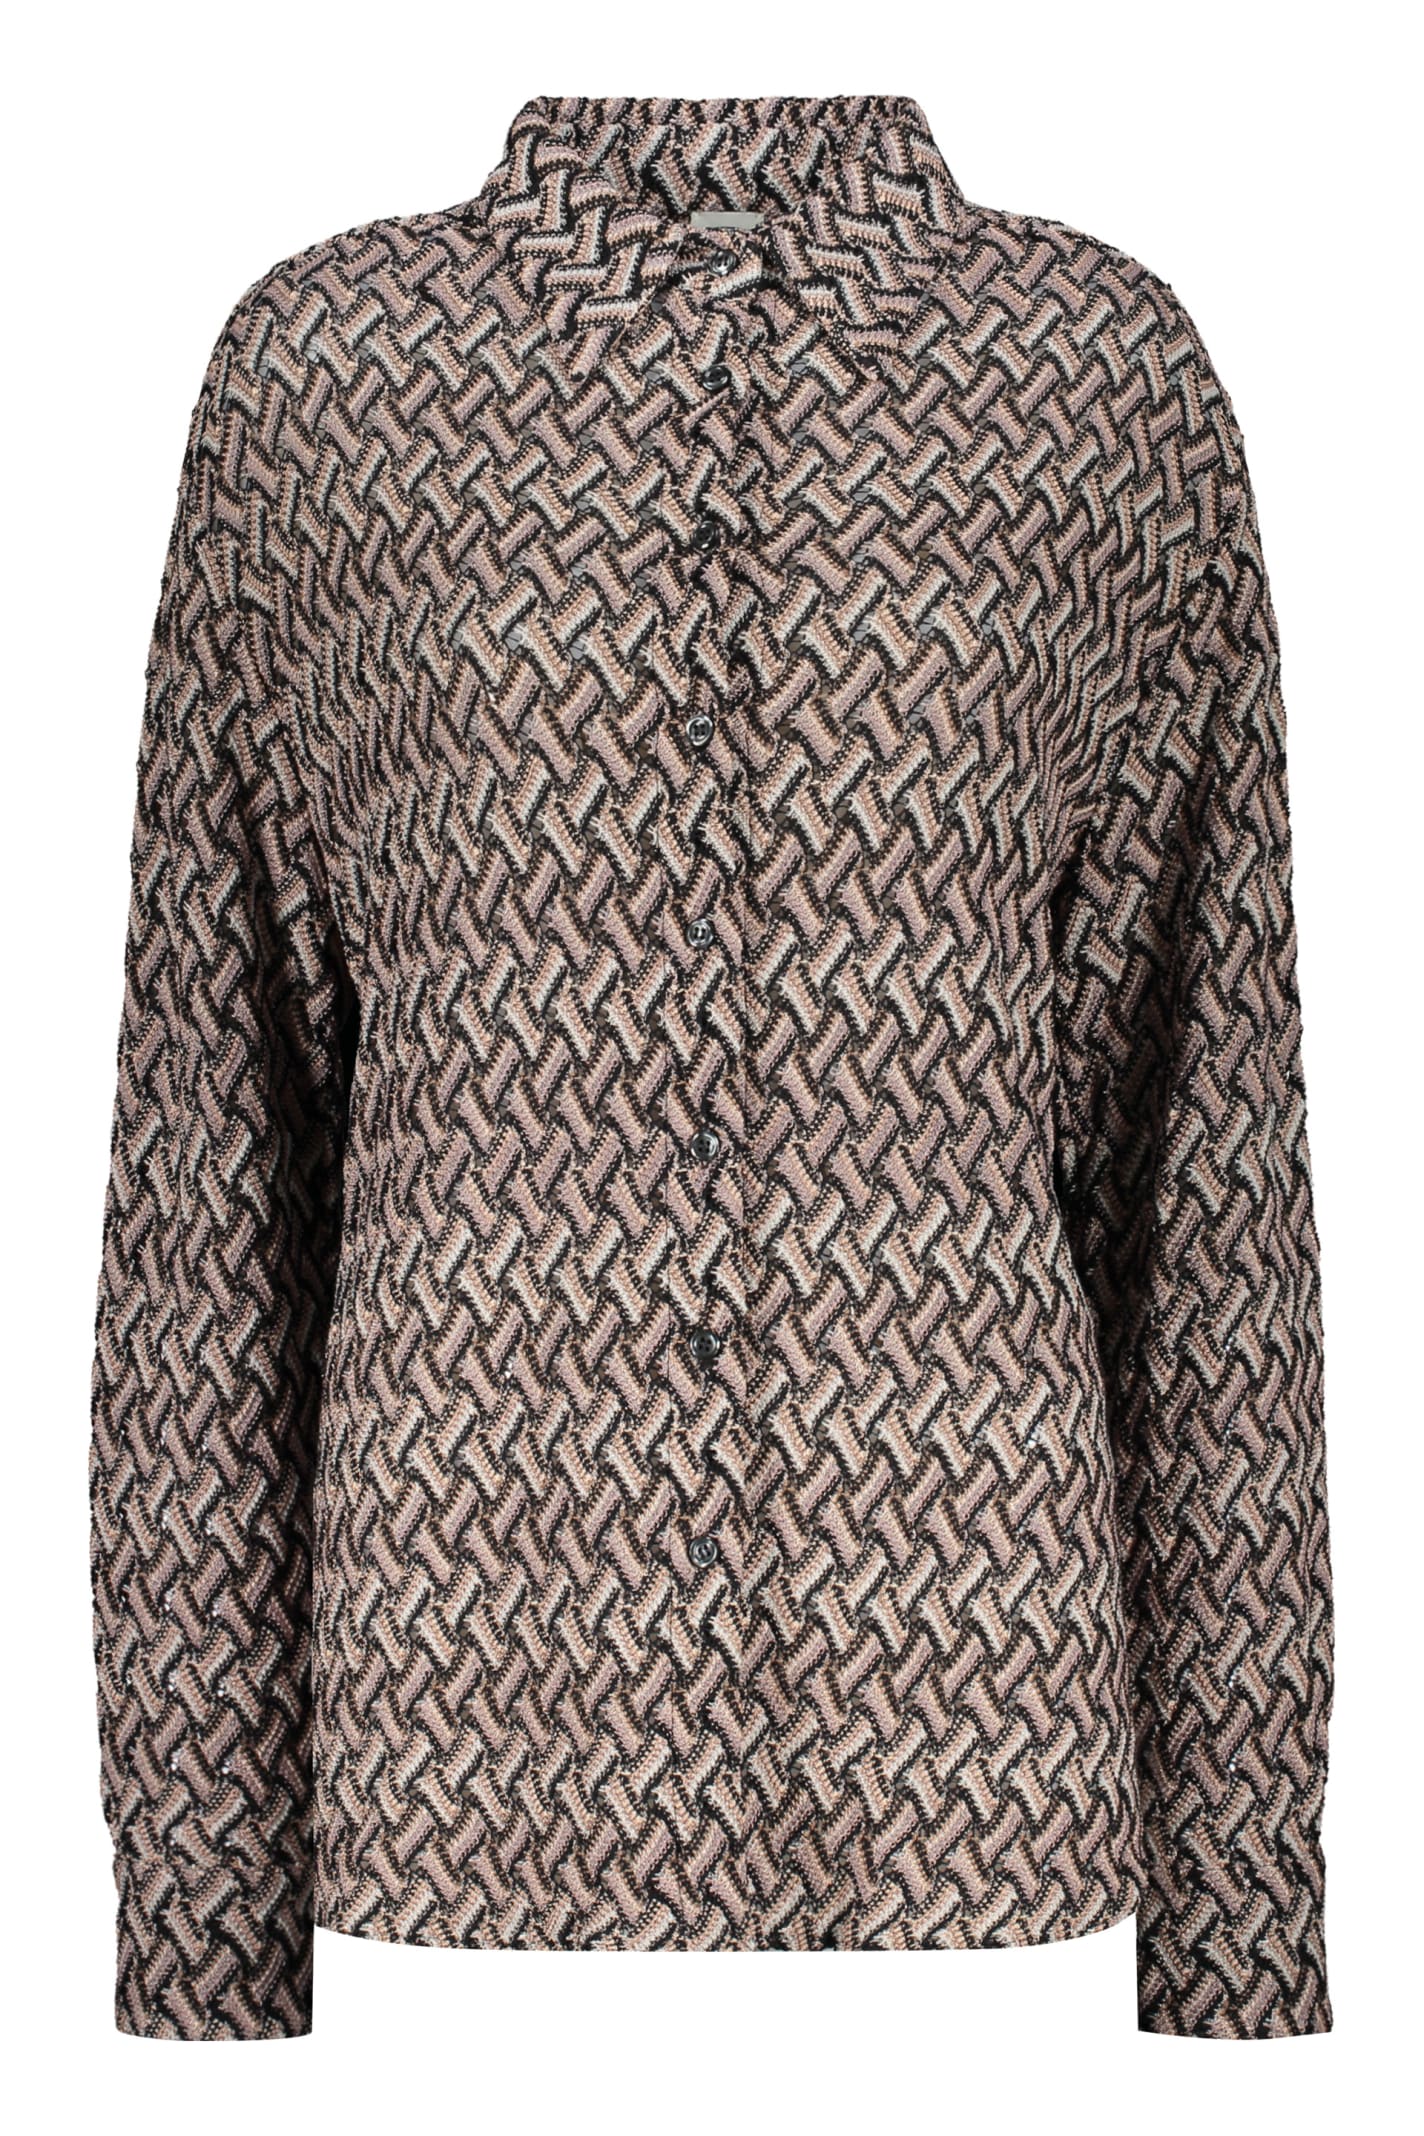 Missoni Patterned Shirt In Brown